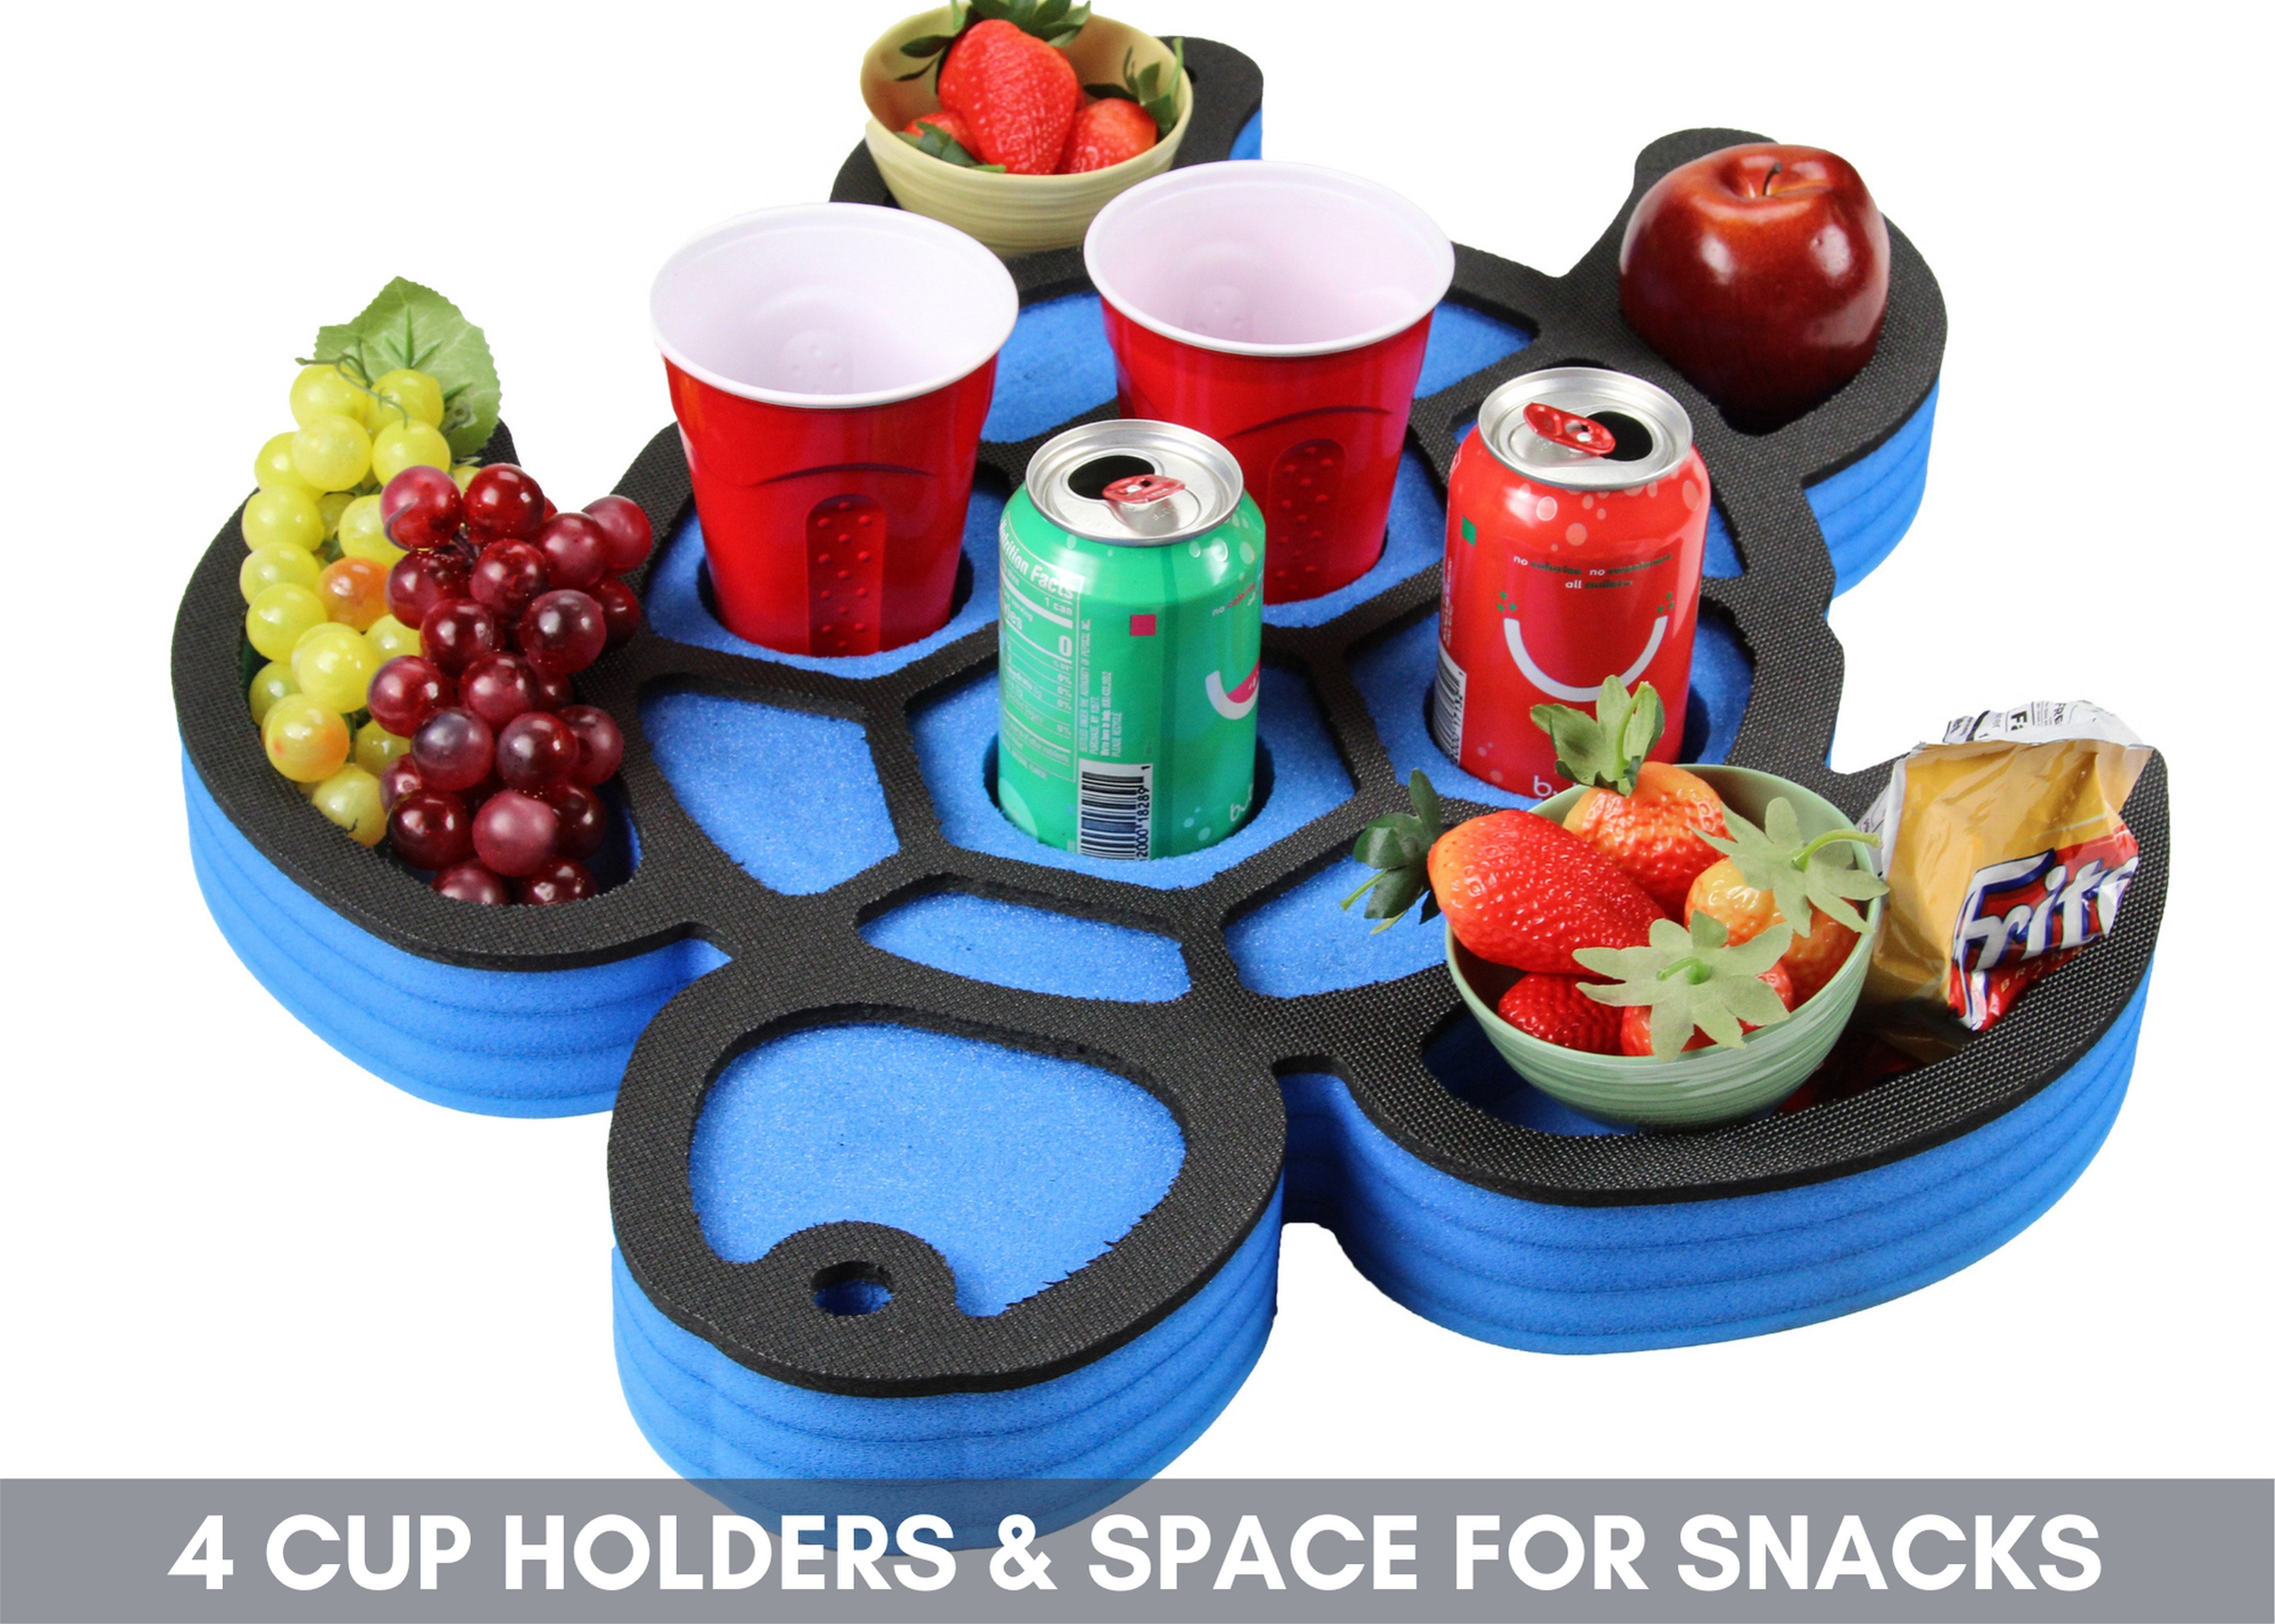 Floating Sea Turtle Drink Holder Refreshment Table Tray Pool or Beach Party Float Lounge Durable Foam 8 Compartment UV Resistant Cup Holders 2 Feet